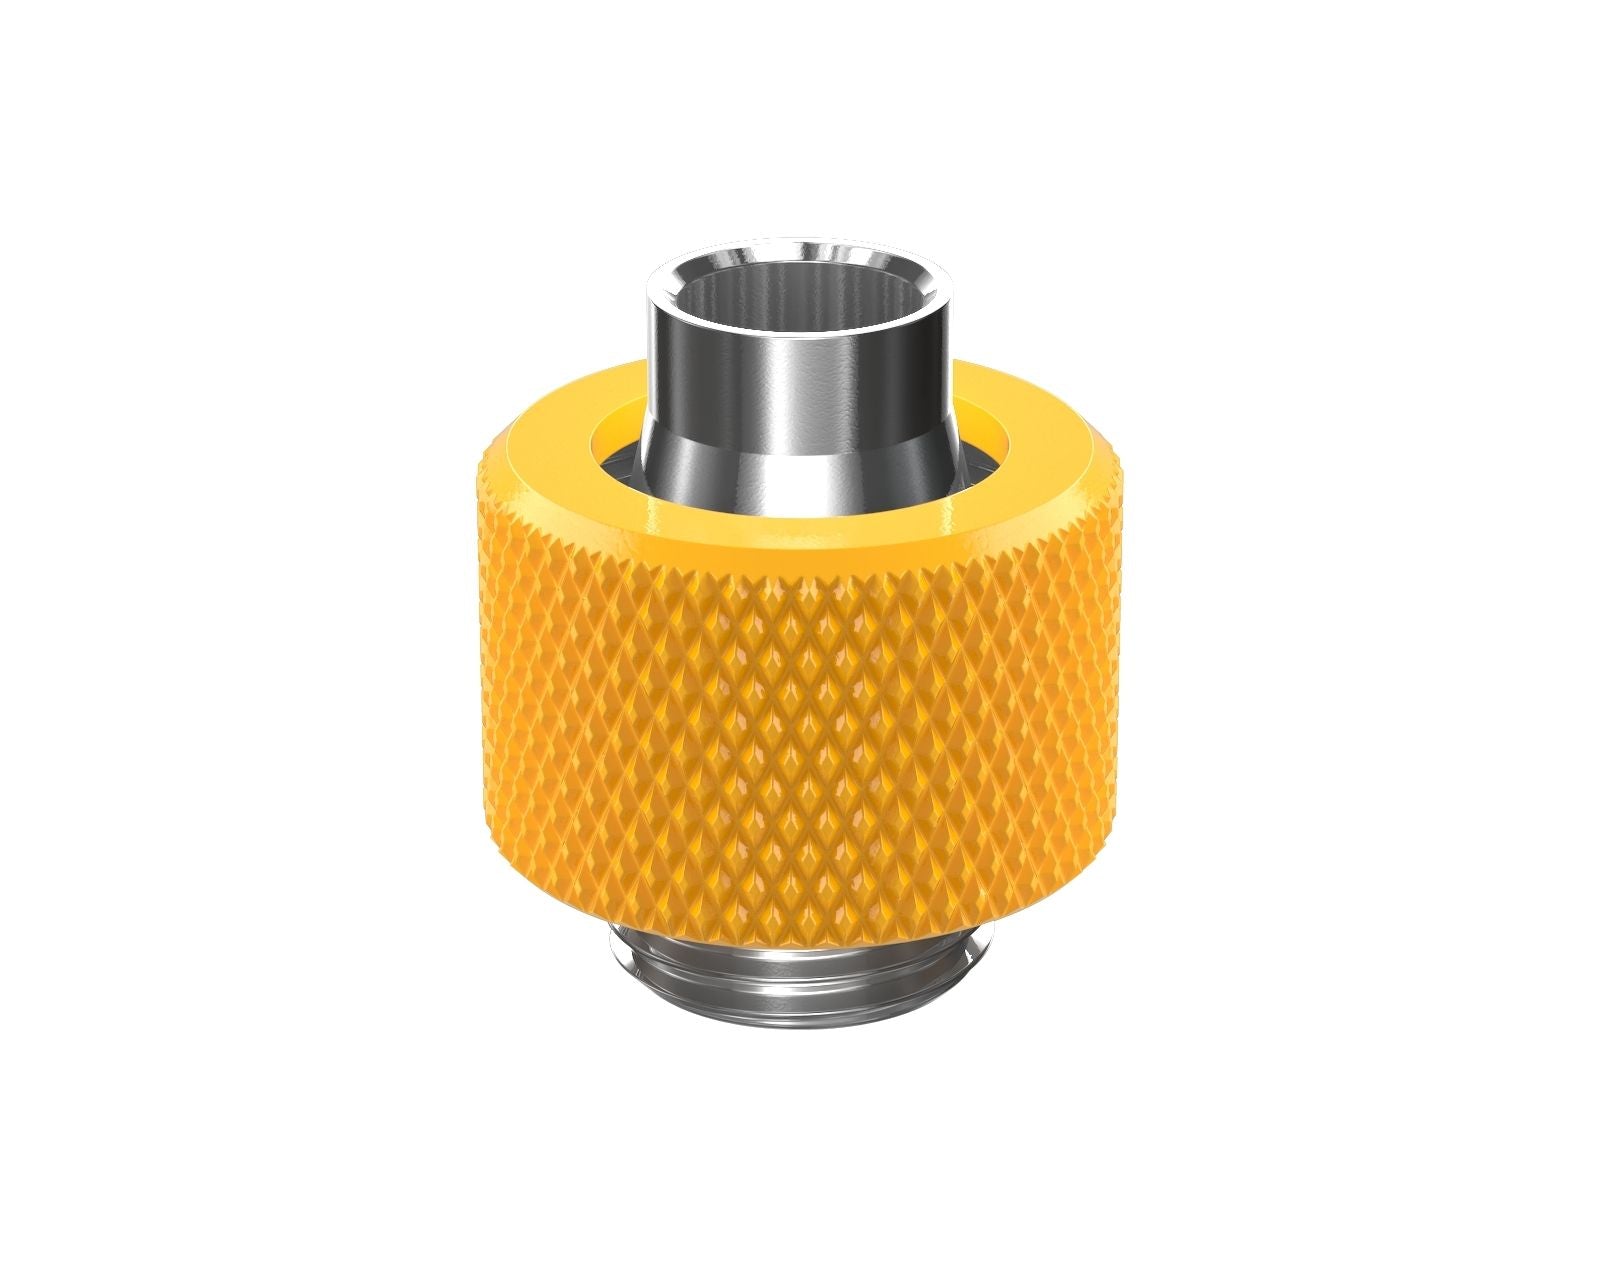 PrimoChill SecureFit SX - Premium Compression Fitting For 3/8in ID x 1/2in OD Flexible Tubing (F-SFSX12) - Available in 20+ Colors, Custom Watercooling Loop Ready - Yellow